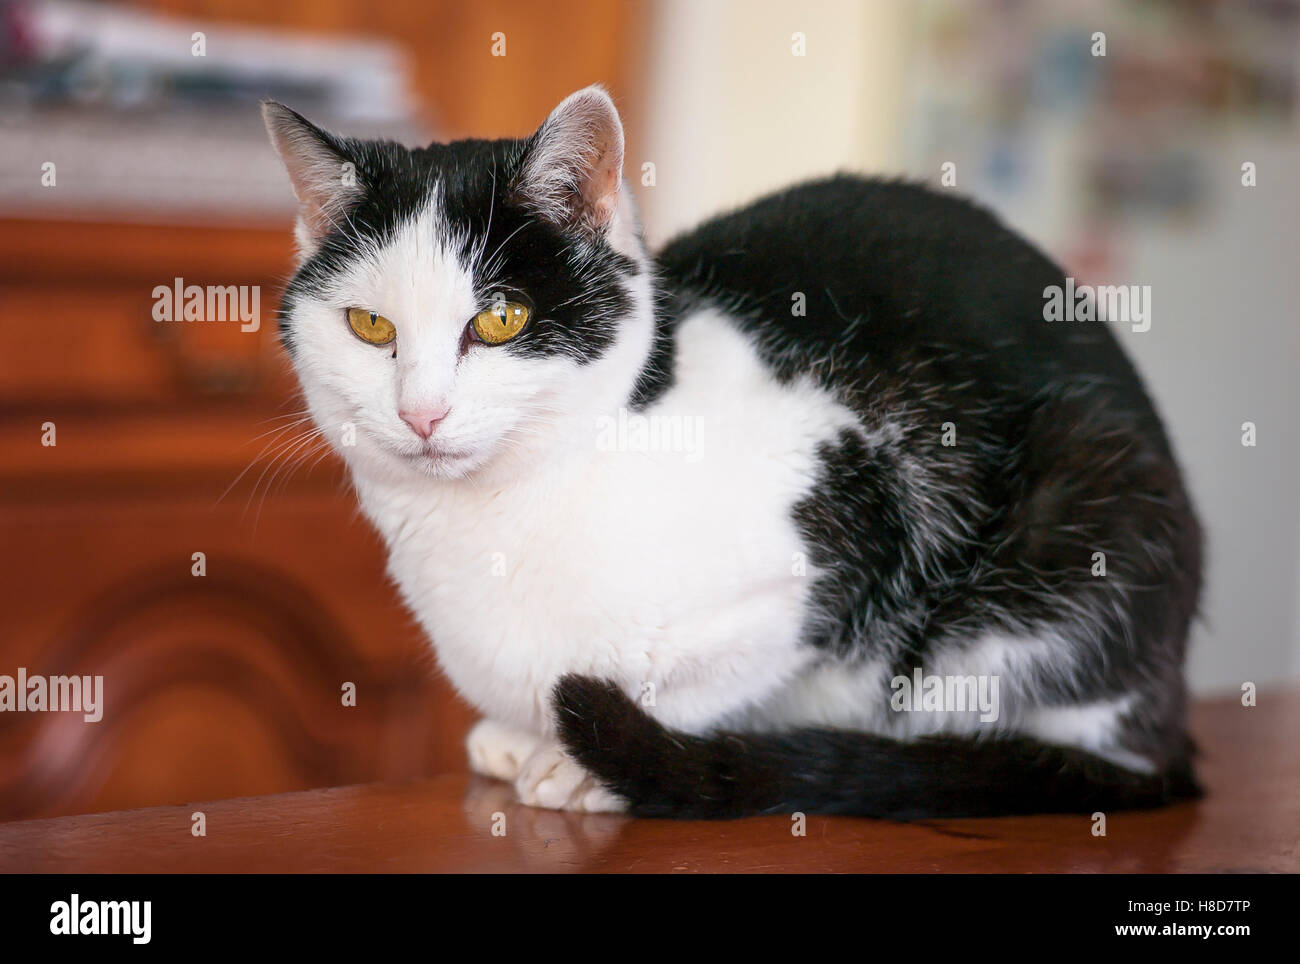 Black and white cat indoors on a table Stock Photo